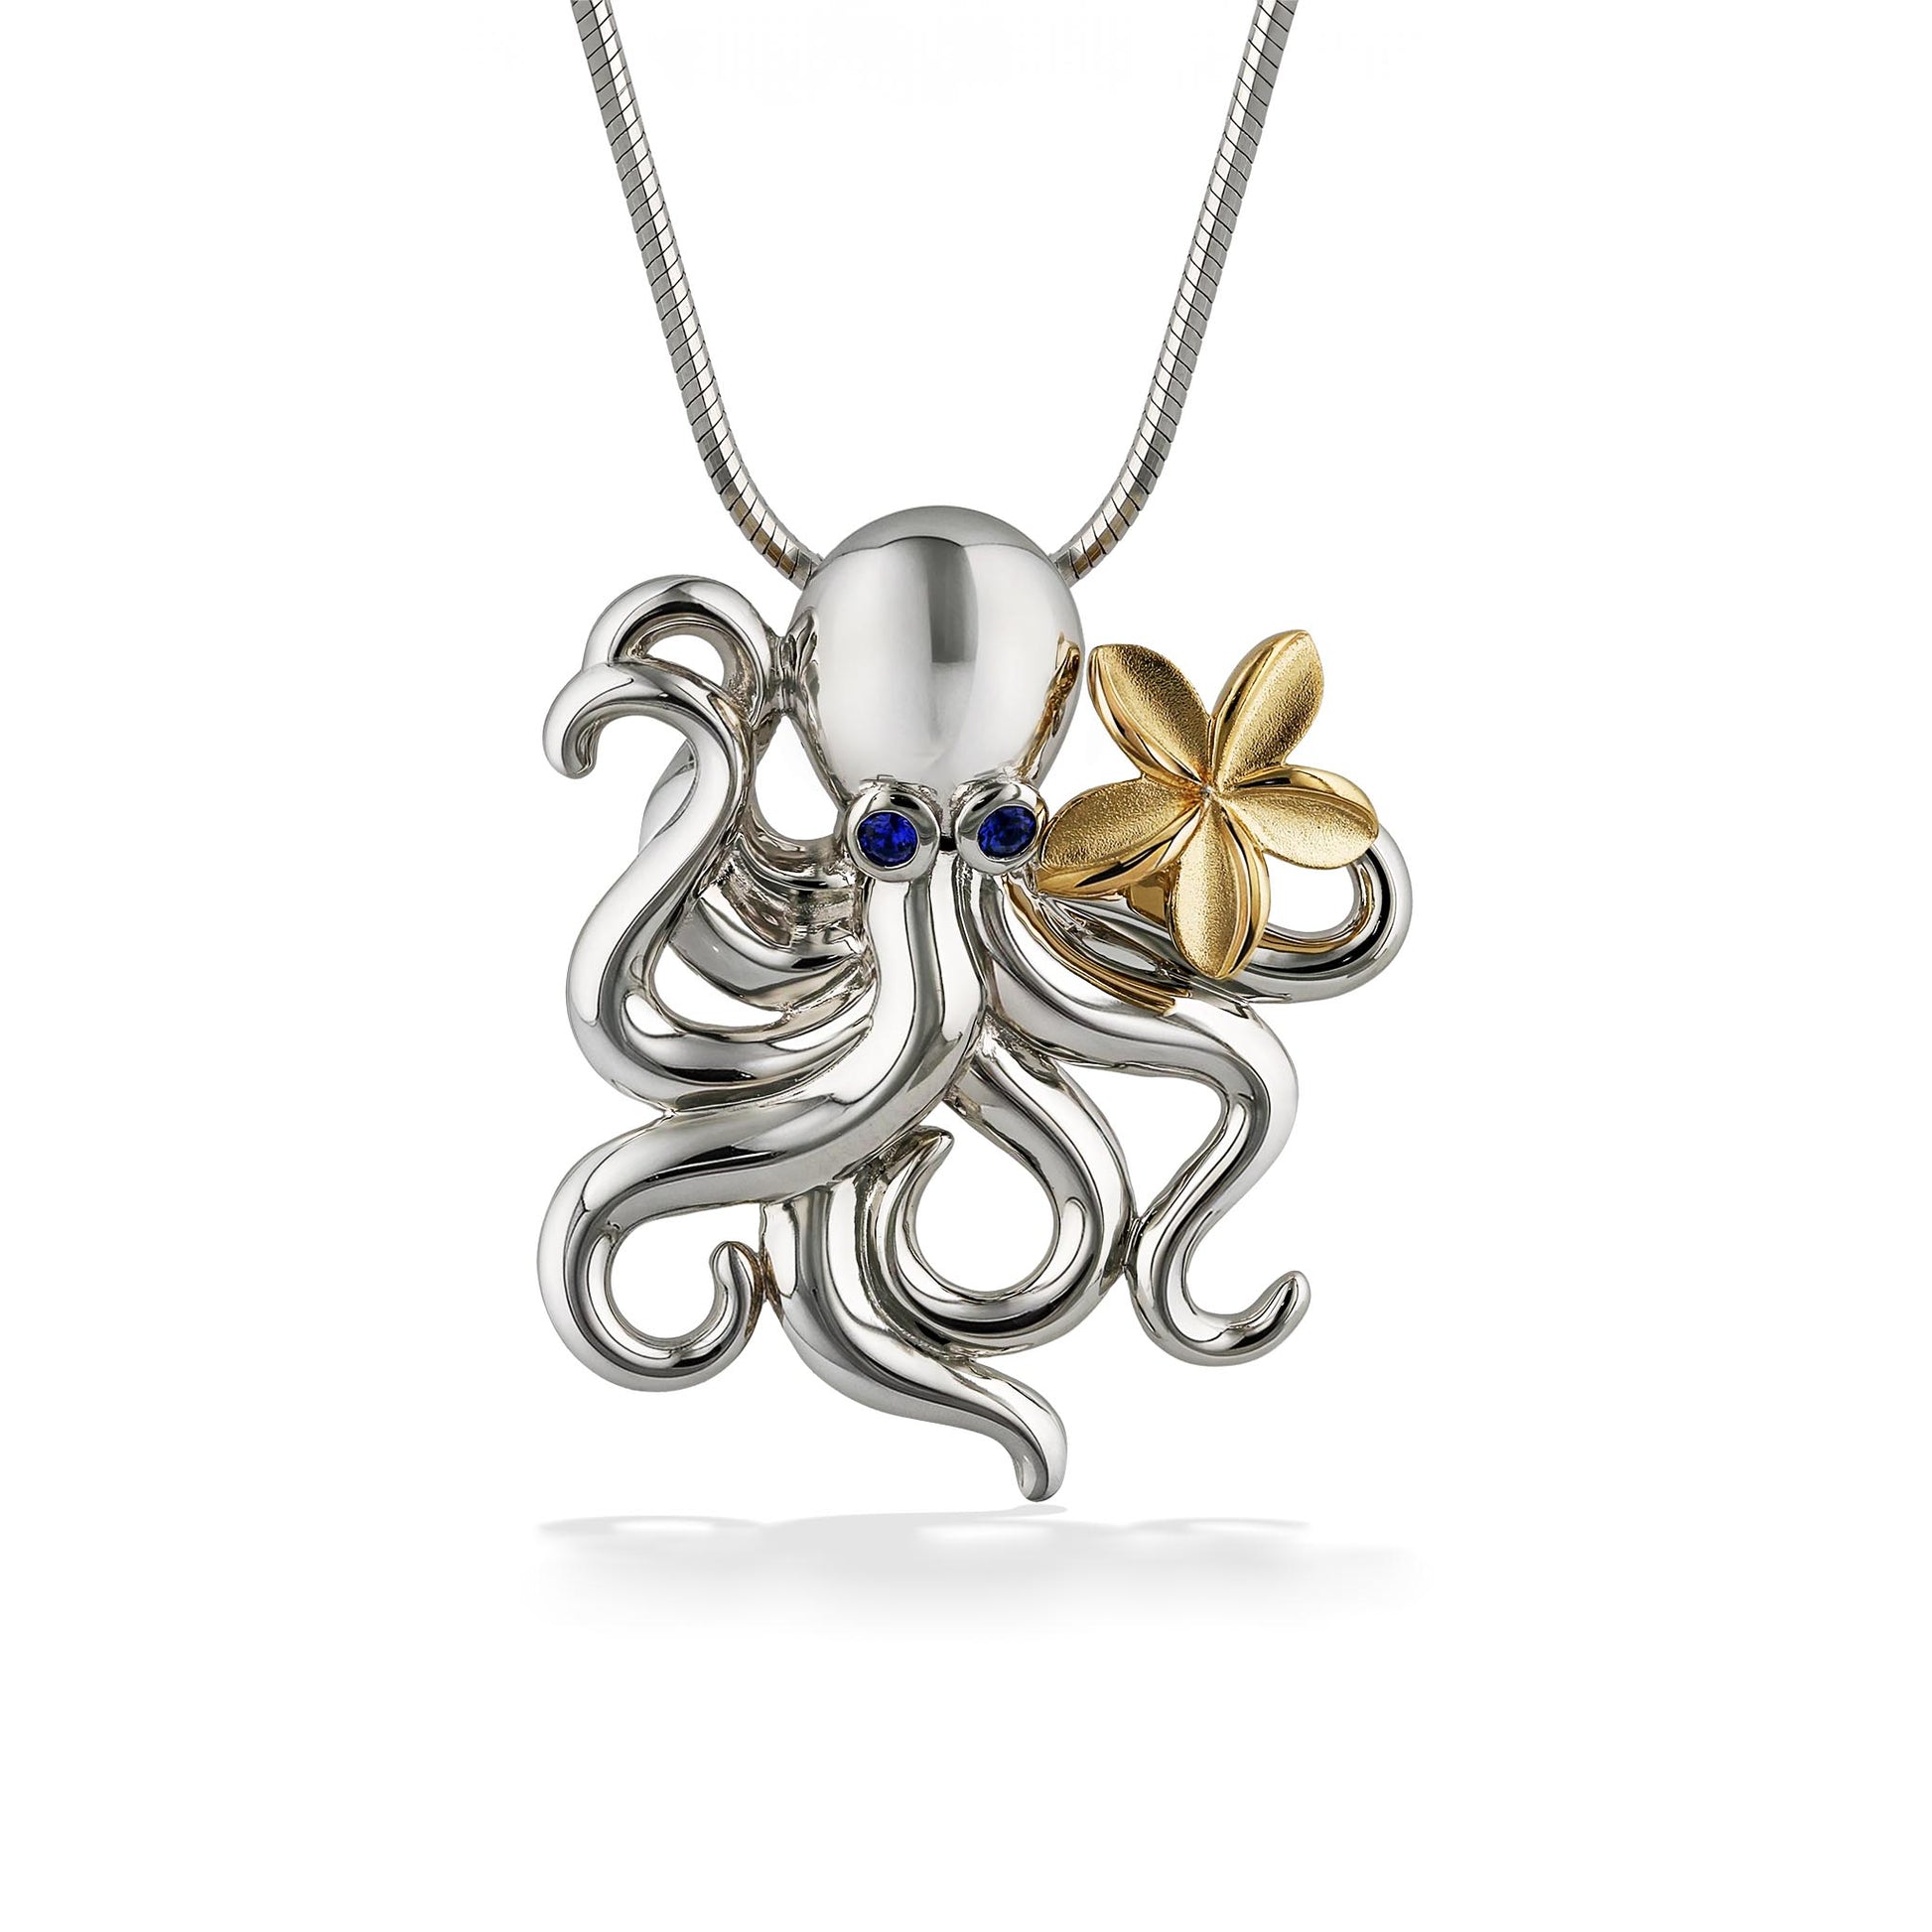 44735 - 14K Yellow Gold and Sterling Silver - Octopus and Plumeria Pendant